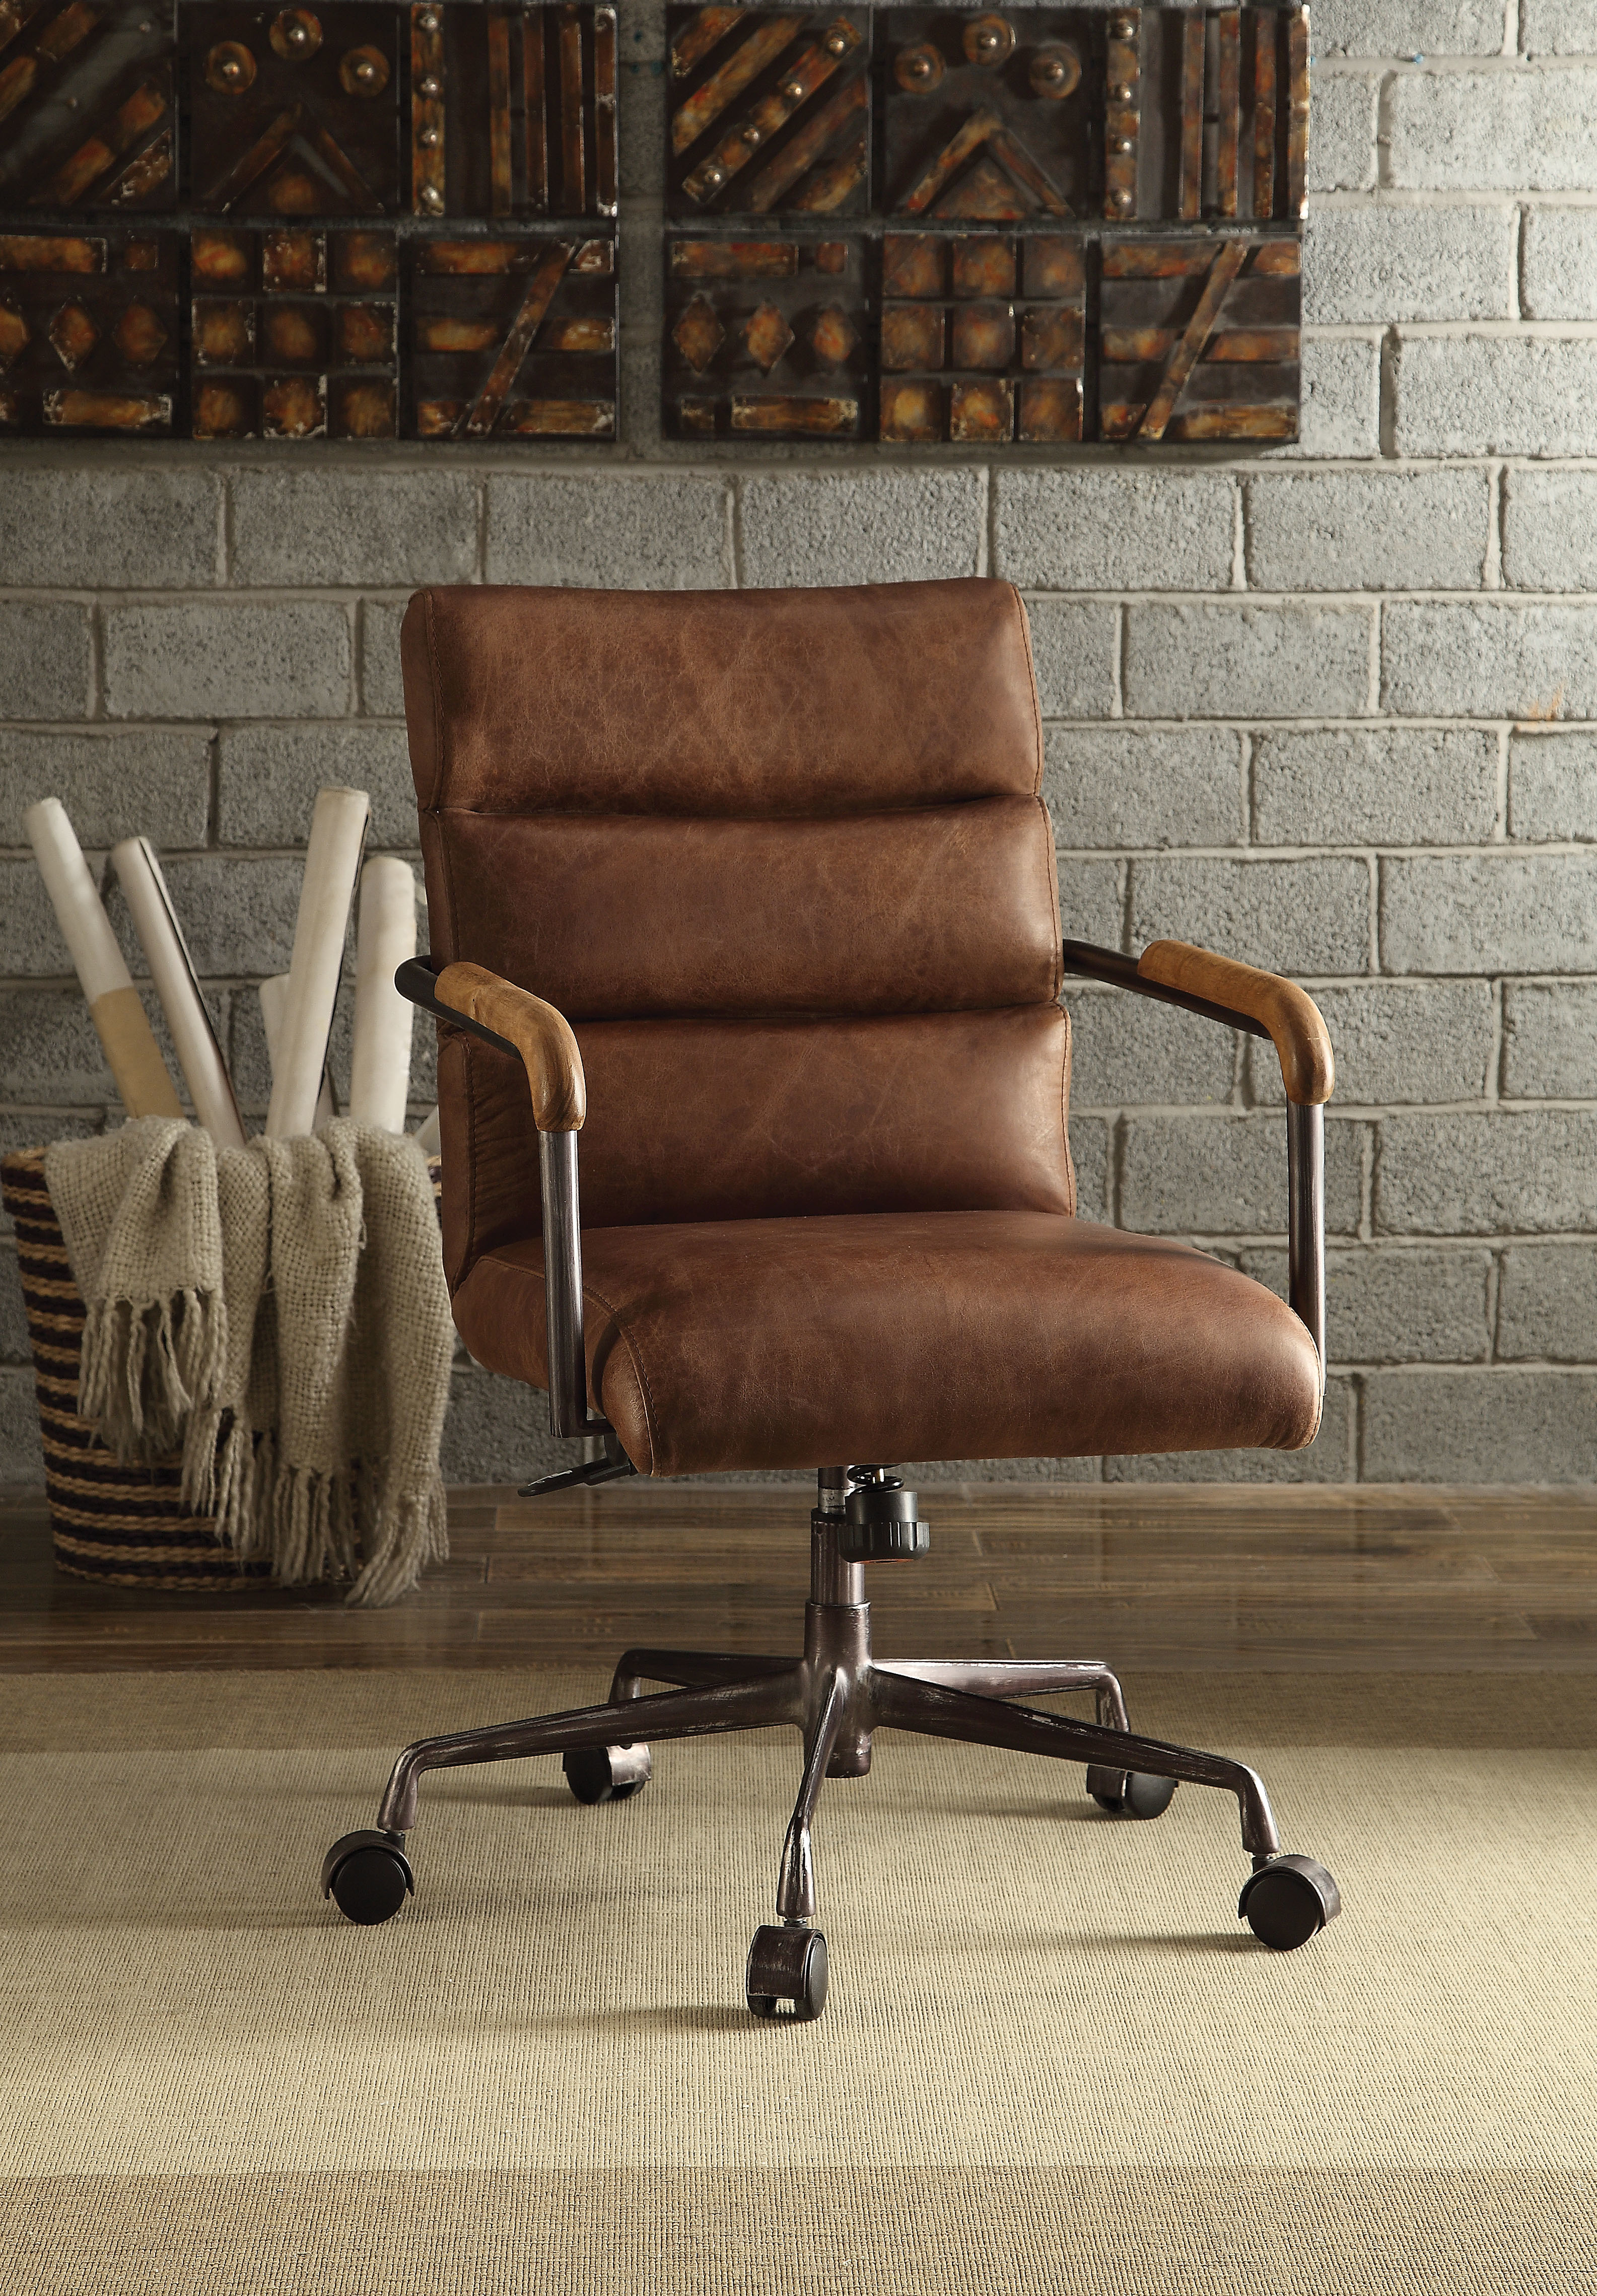 Metal & Leather Executive Office Chair, Retro Brown